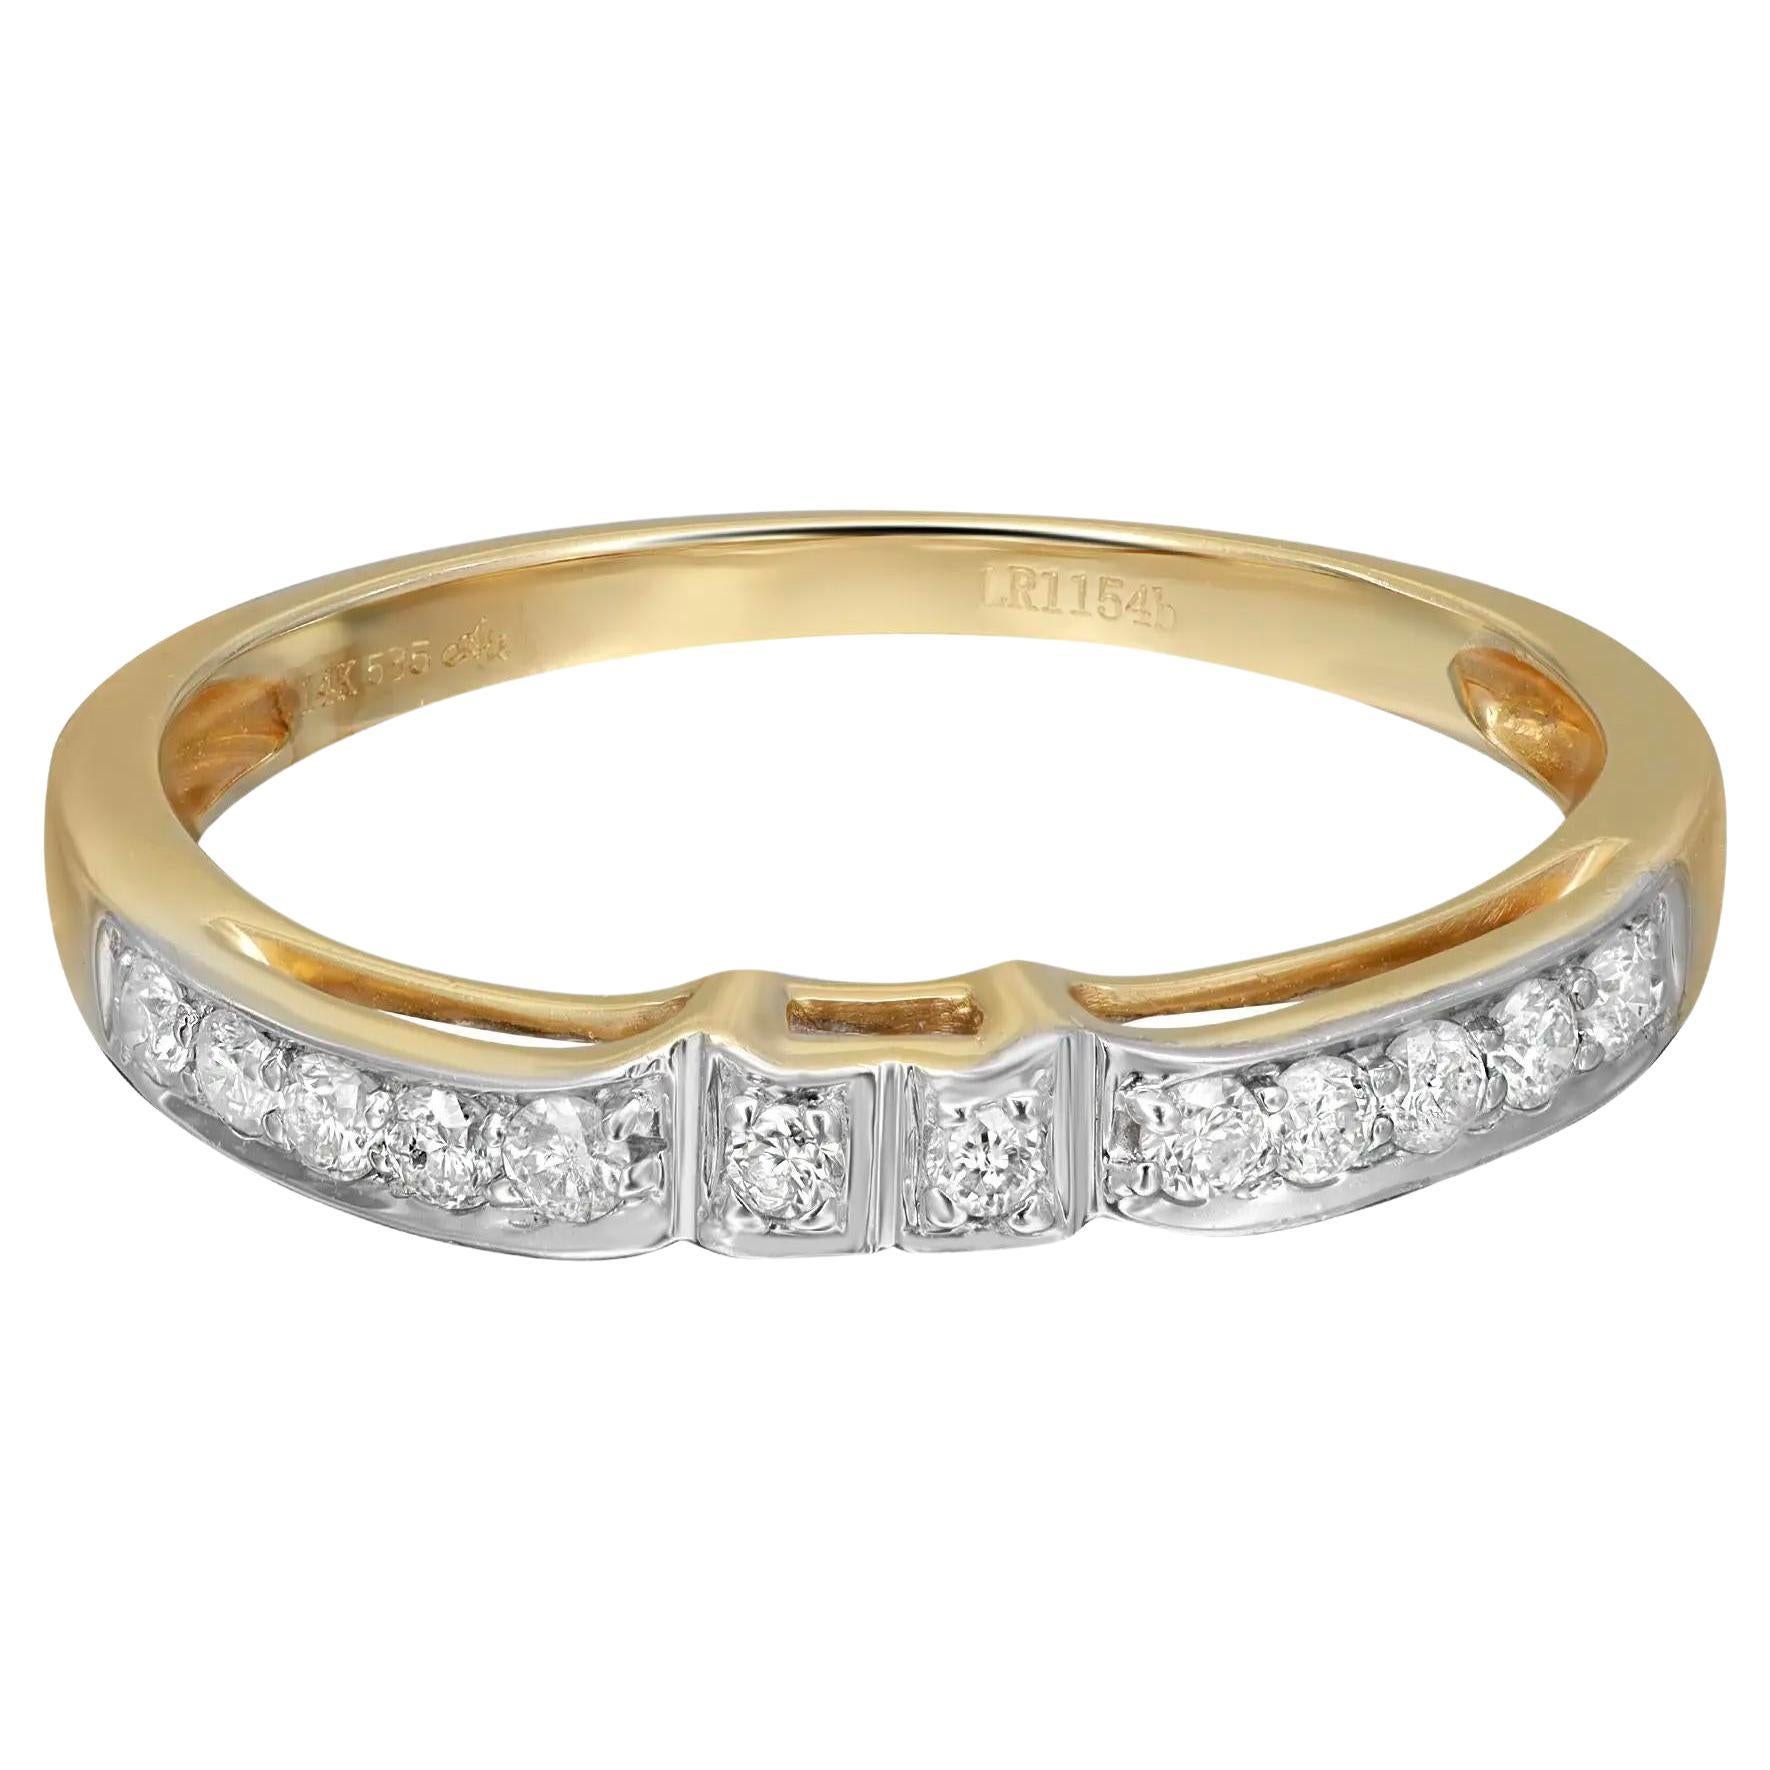 0.37cttw Pave Set Round Cut Diamond Petite Band Ring 14k Yellow Gold For Sale